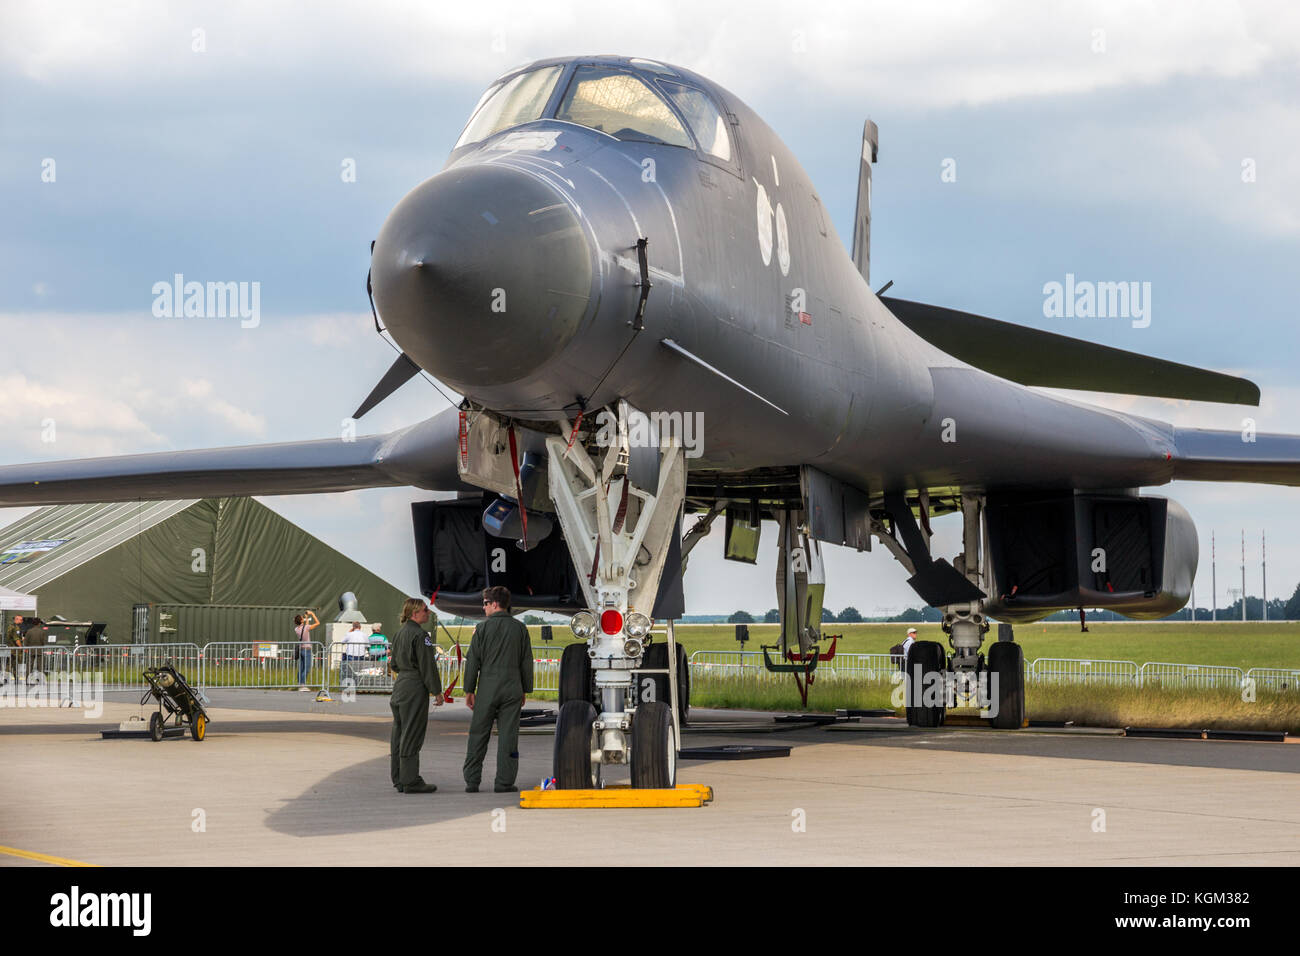 BERLIN, GERMANY - JUNE 2, 2016: US Air Force strategic bomber B-1B Lancer on display at the Exhibition ILA Berlin Air Show 2016 Stock Photo